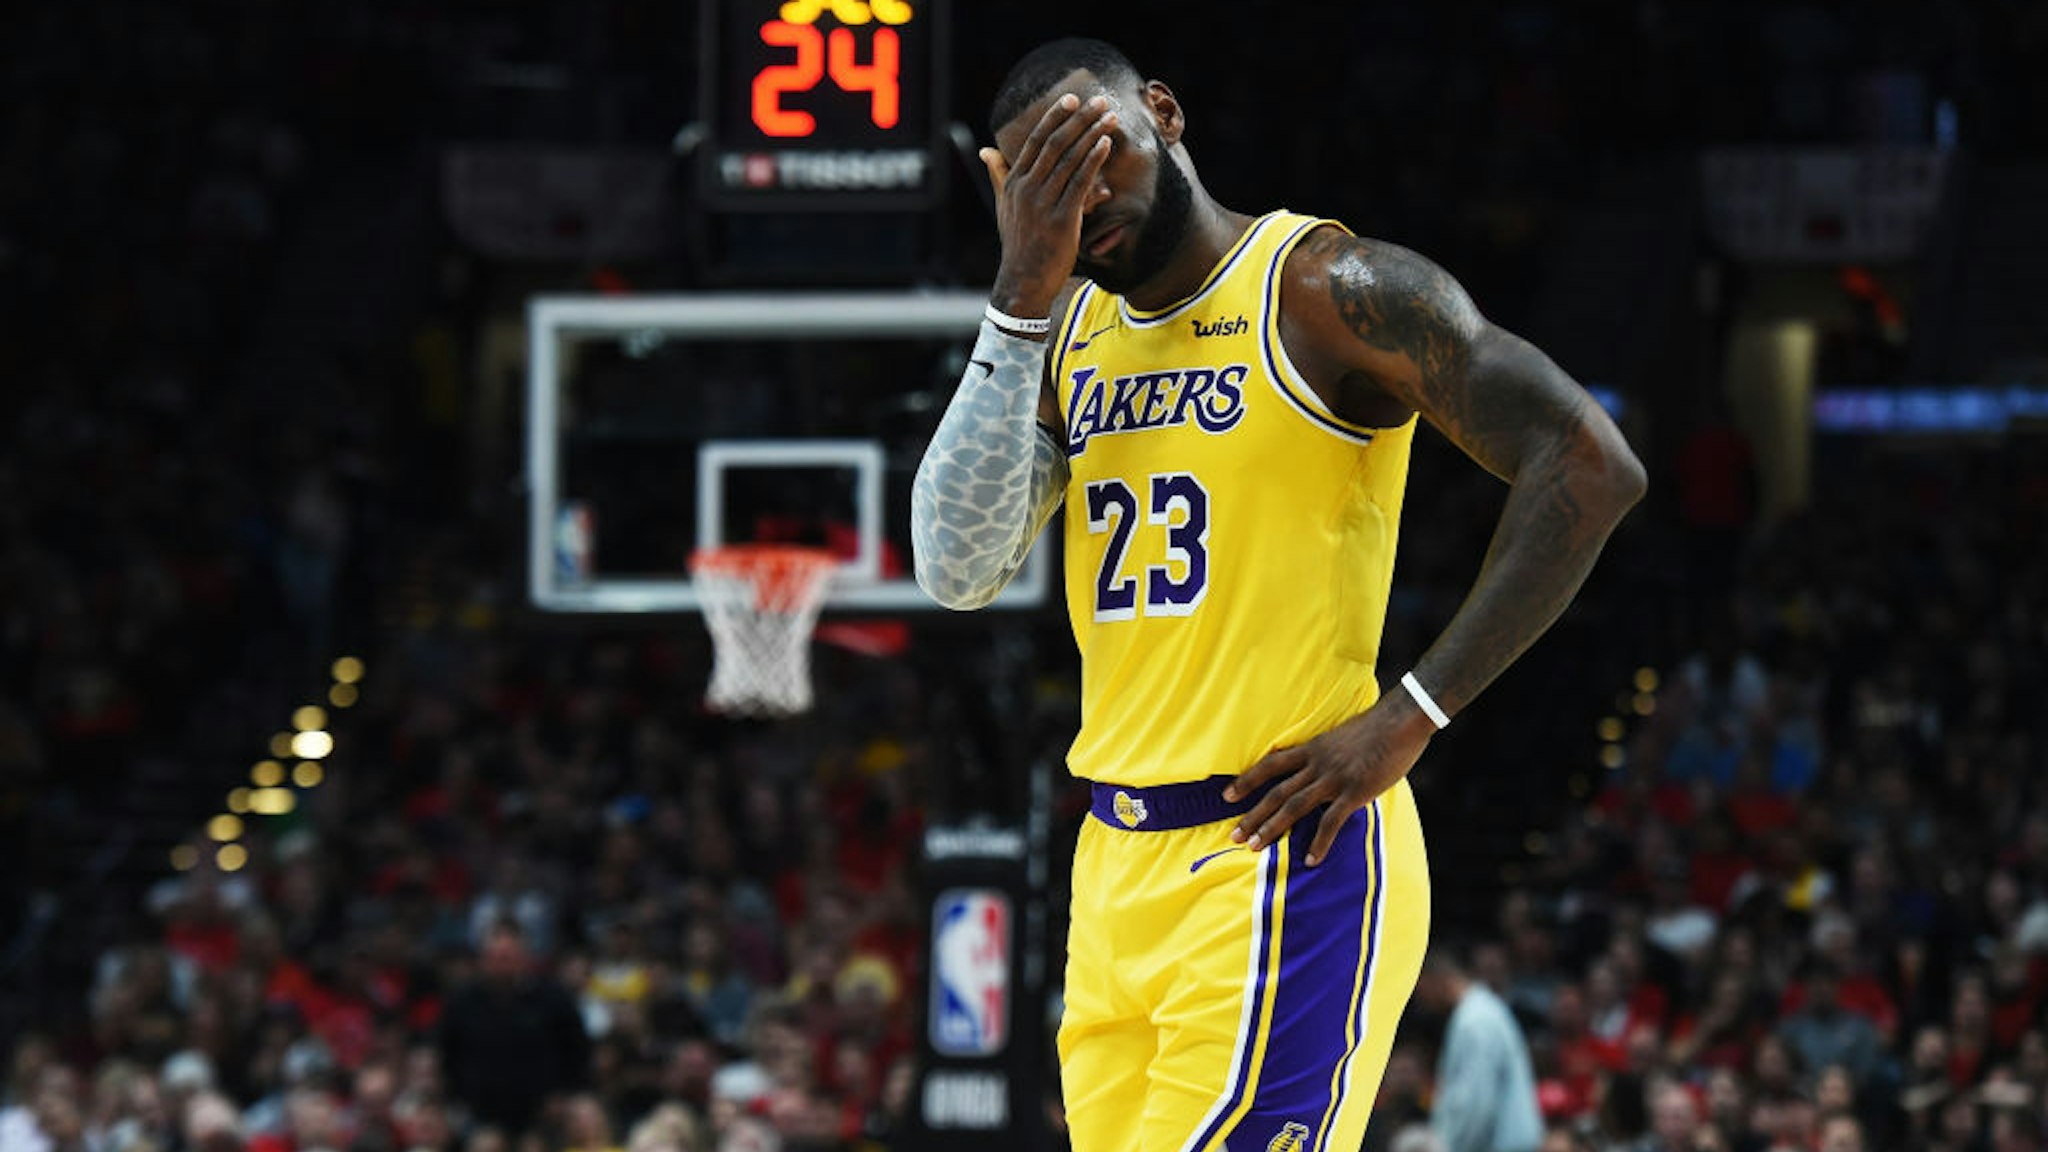 PORTLAND, OR - OCTOBER 18: LeBron James #23 of the Los Angeles Lakers reacts in the first quarter against the Portland Trail Blazers during their game at Moda Center on October 18, 2018 in Portland, Oregon. NOTE TO USER: User expressly acknowledges and agrees that, by downloading and or using this photograph, User is consenting to the terms and conditions of the Getty Images License Agreement. (Photo by Steve Dykes/Getty Images)